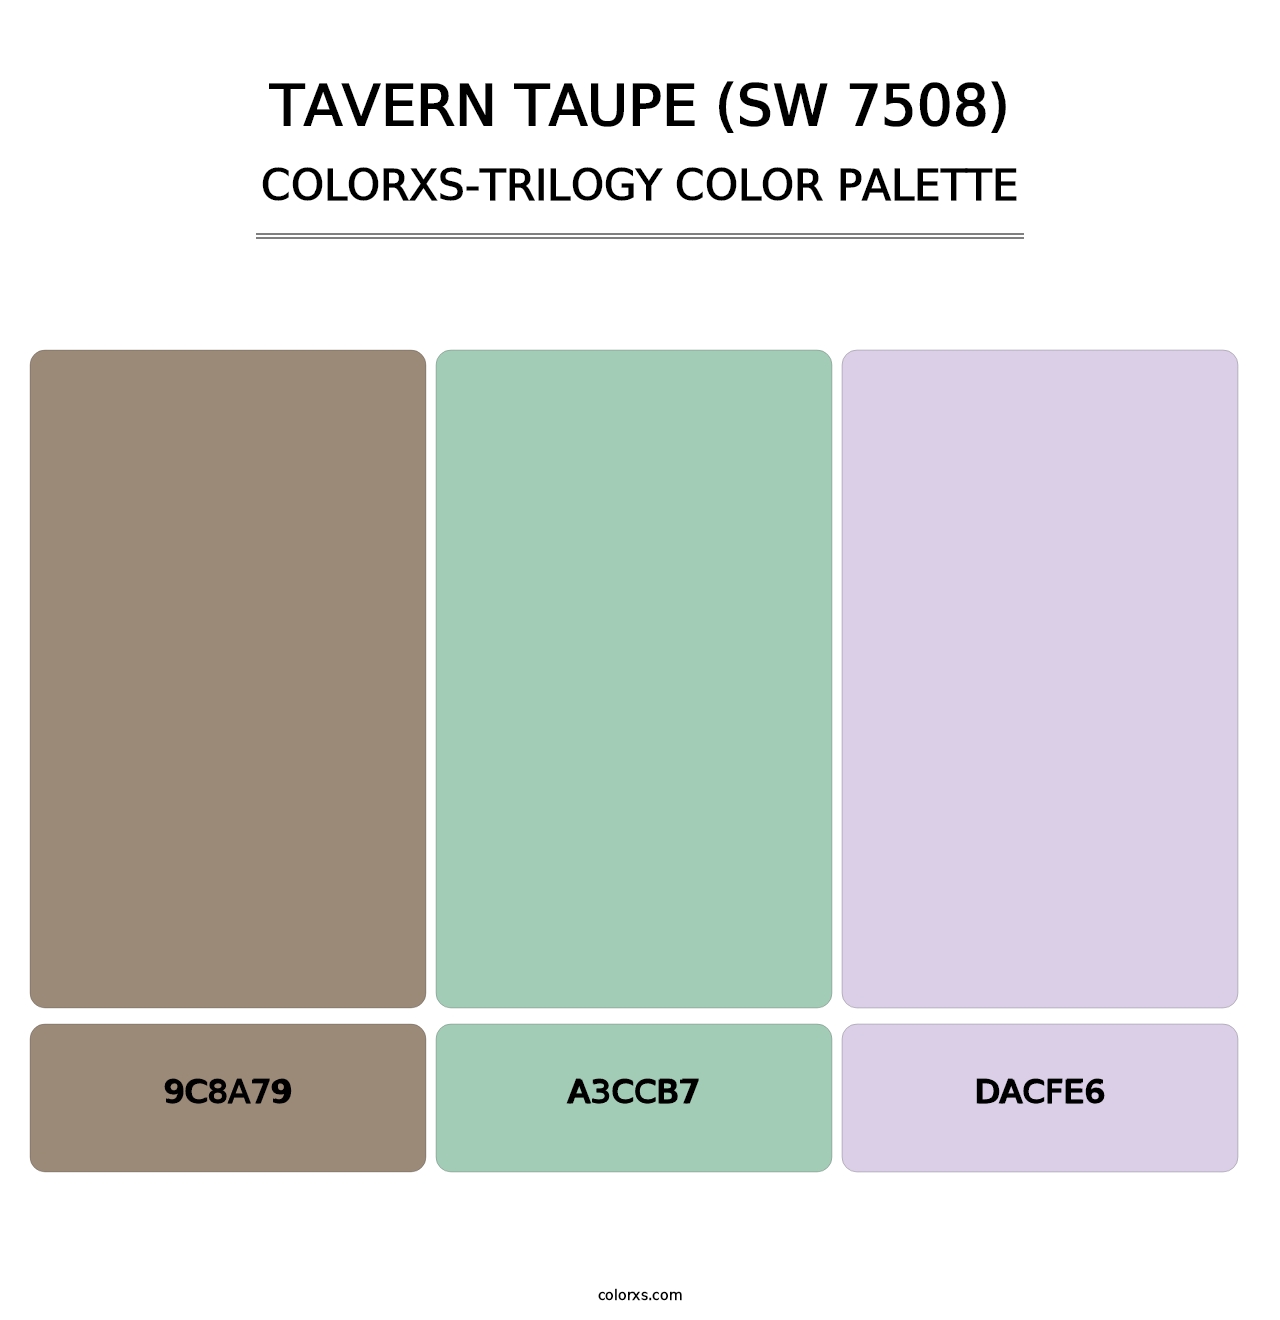 Tavern Taupe (SW 7508) - Colorxs Trilogy Palette